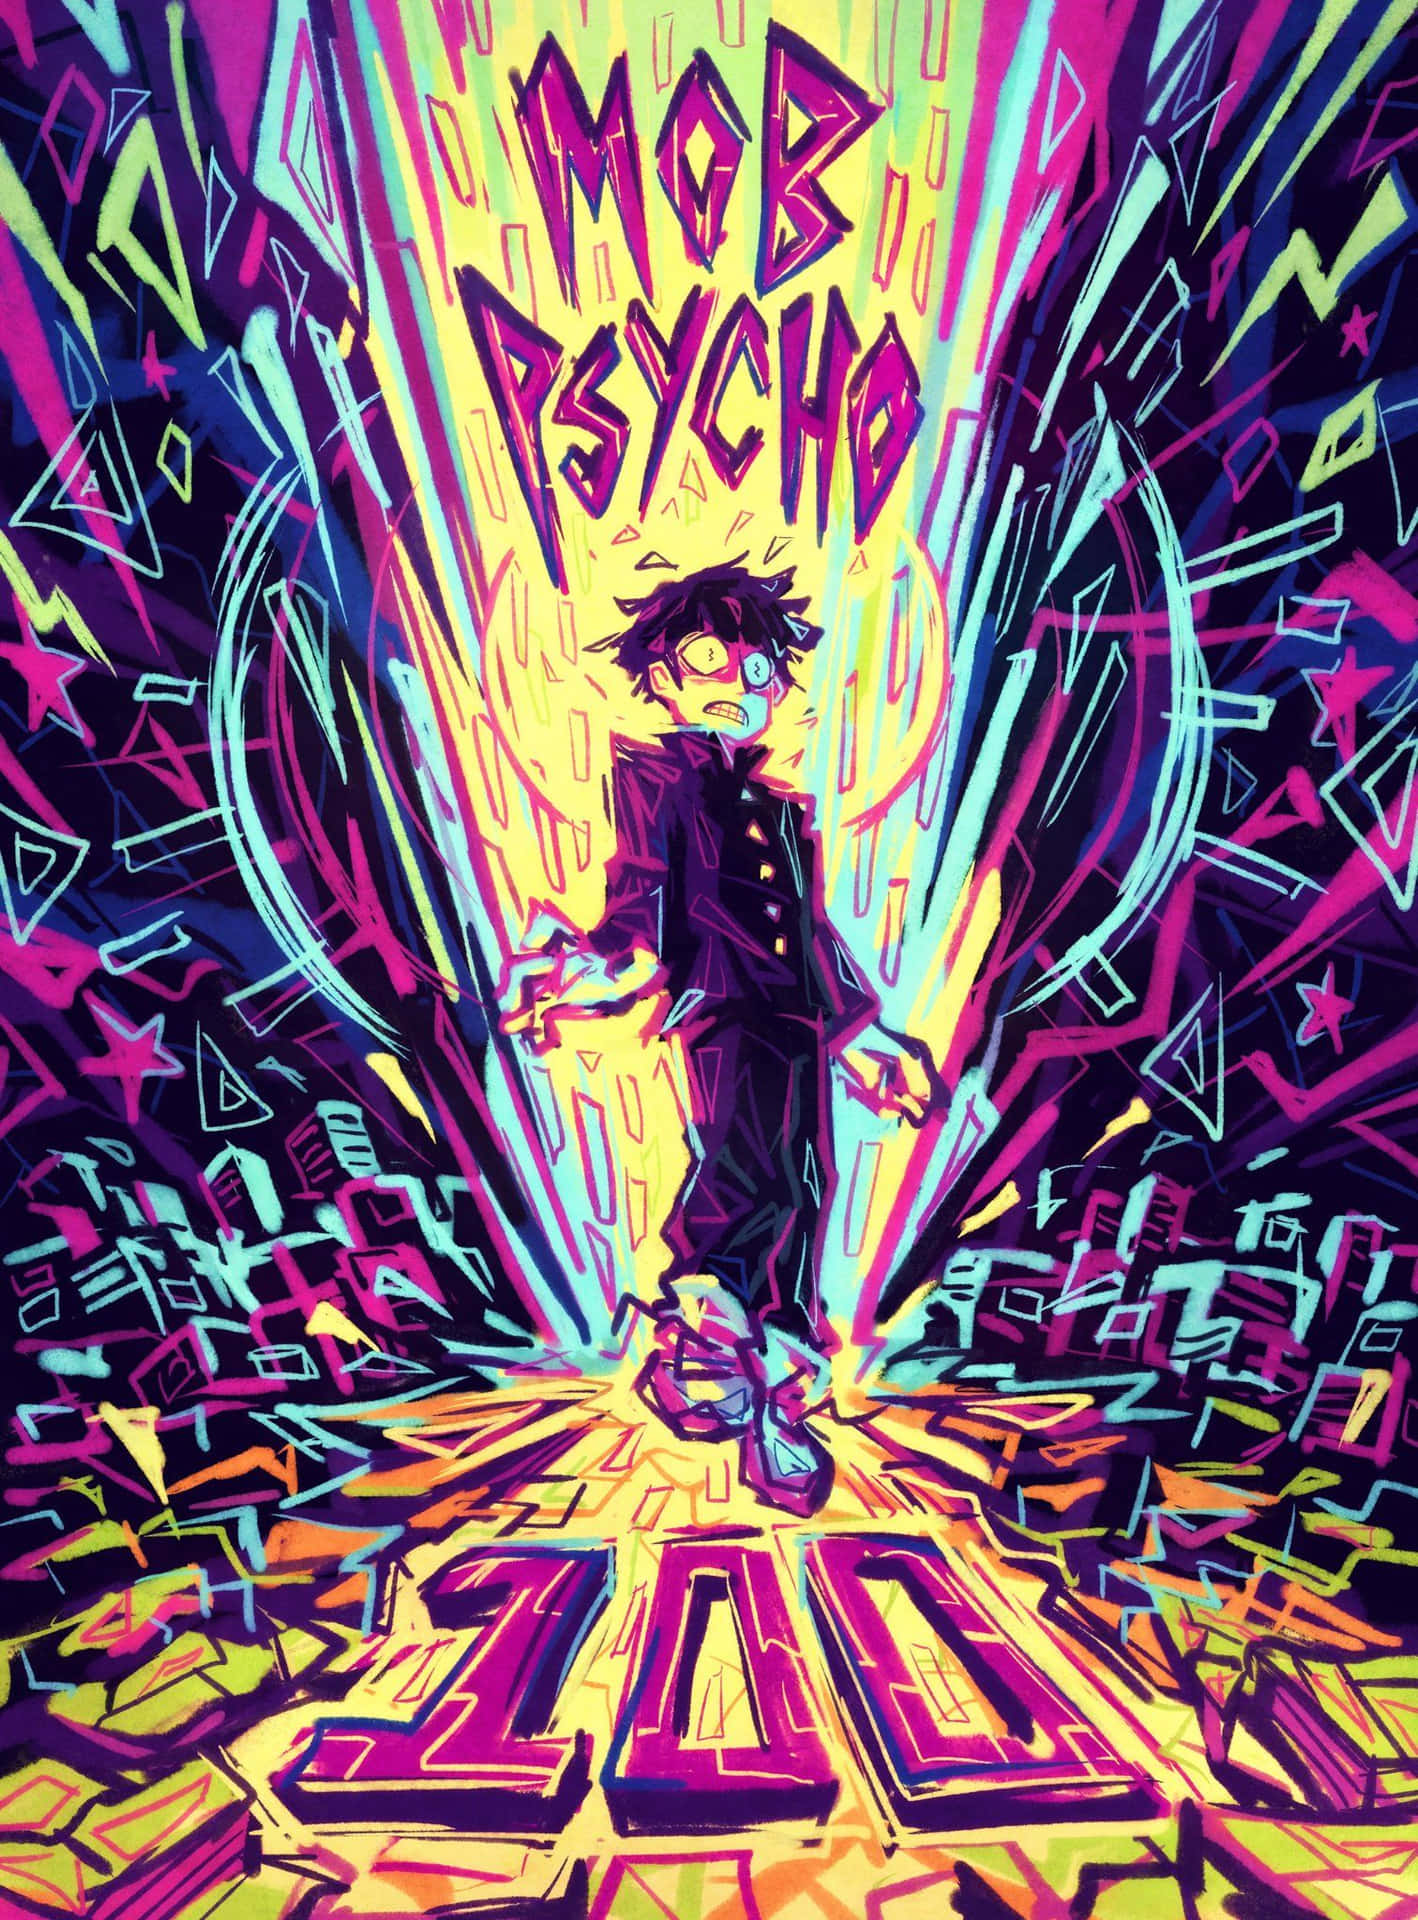 Mob Psycho 100 – follow the journey of an Esper as he unlocks his potential